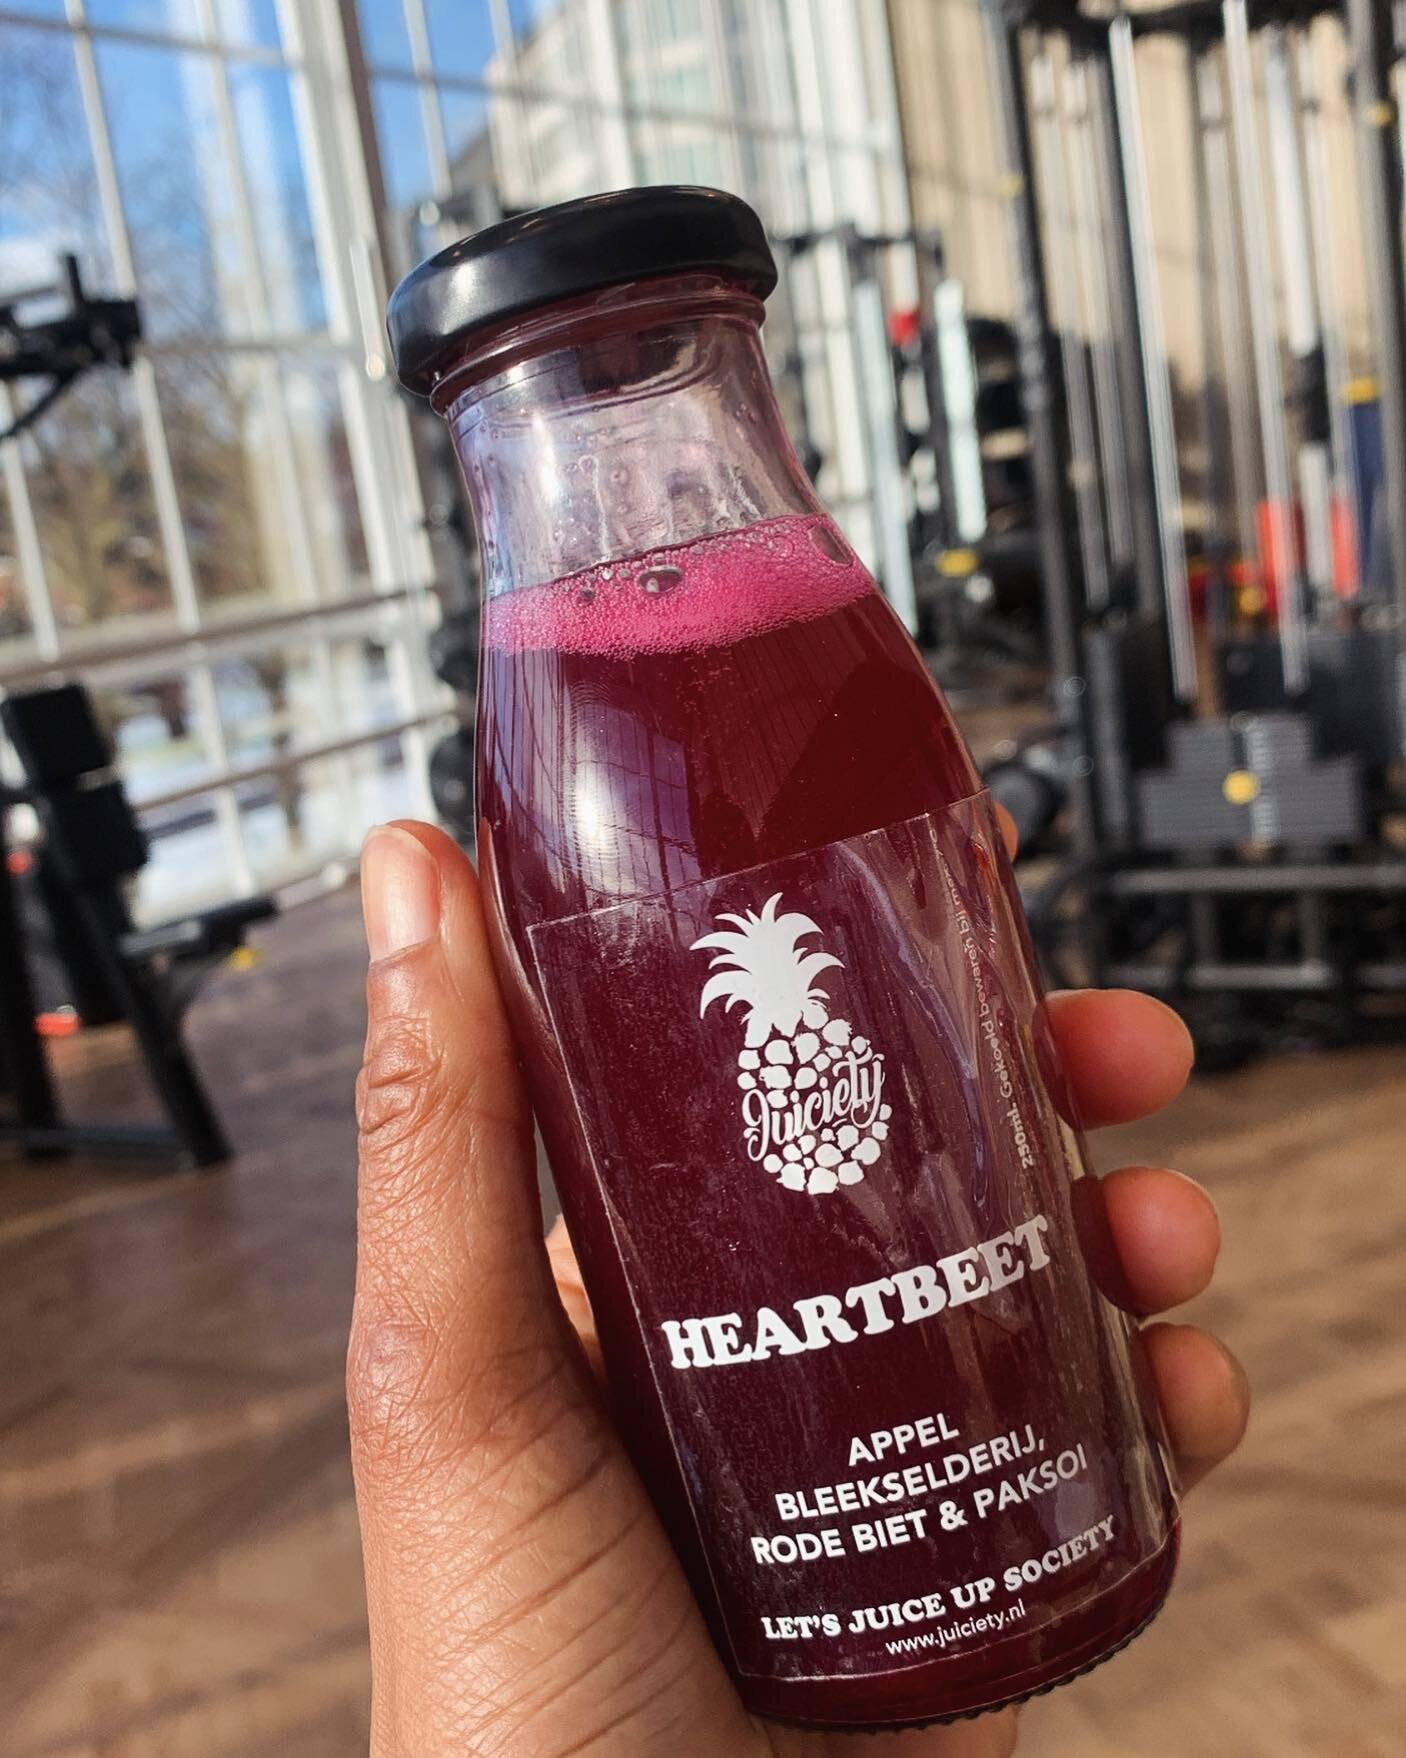 Happy Monday ✨
It&rsquo;s a new week, let&rsquo;s get it! &hellip; and don&rsquo;t forget your vitamins 🥬 💪🏾
~~~~~~~~~~~~~~~~~~~~~~~~~~~~~~~~~~~~~~~

#juiciety #letsjuiceupsociety #juicelibi #heartbeet #juice #amsterdam #happymonday